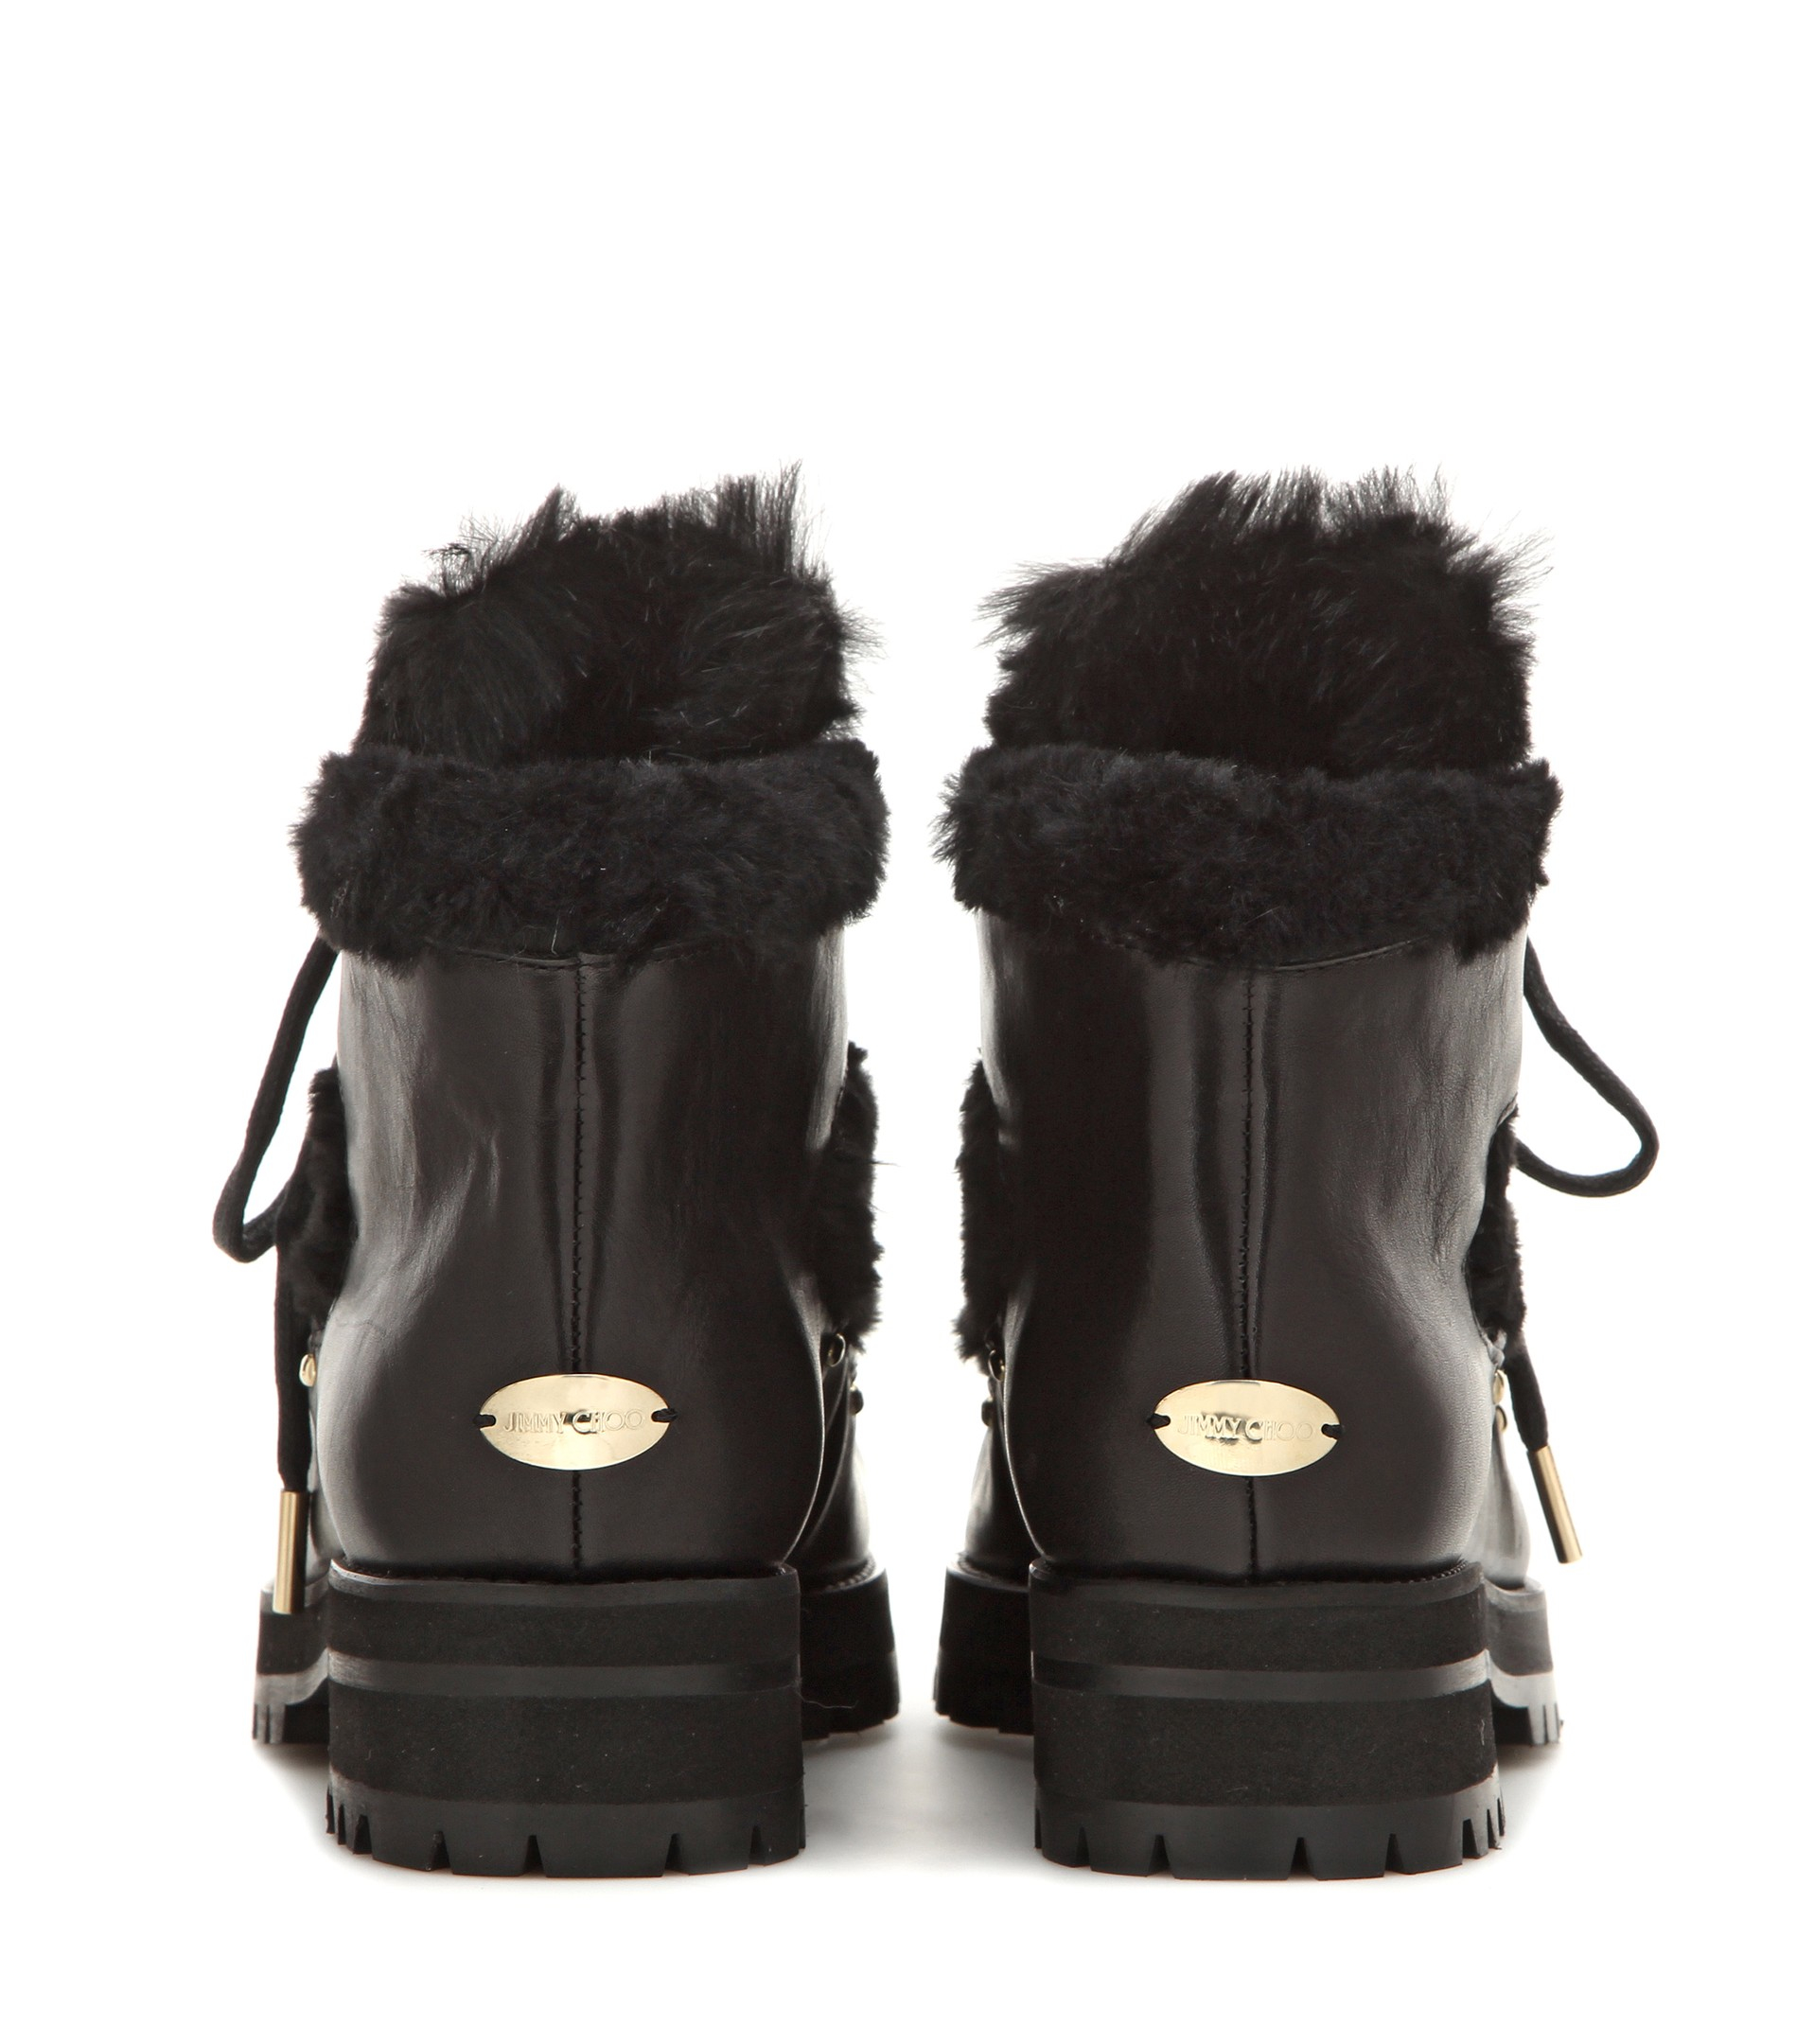 Lyst - Jimmy choo Ditto Fur-Lined Ankle Boots in Black